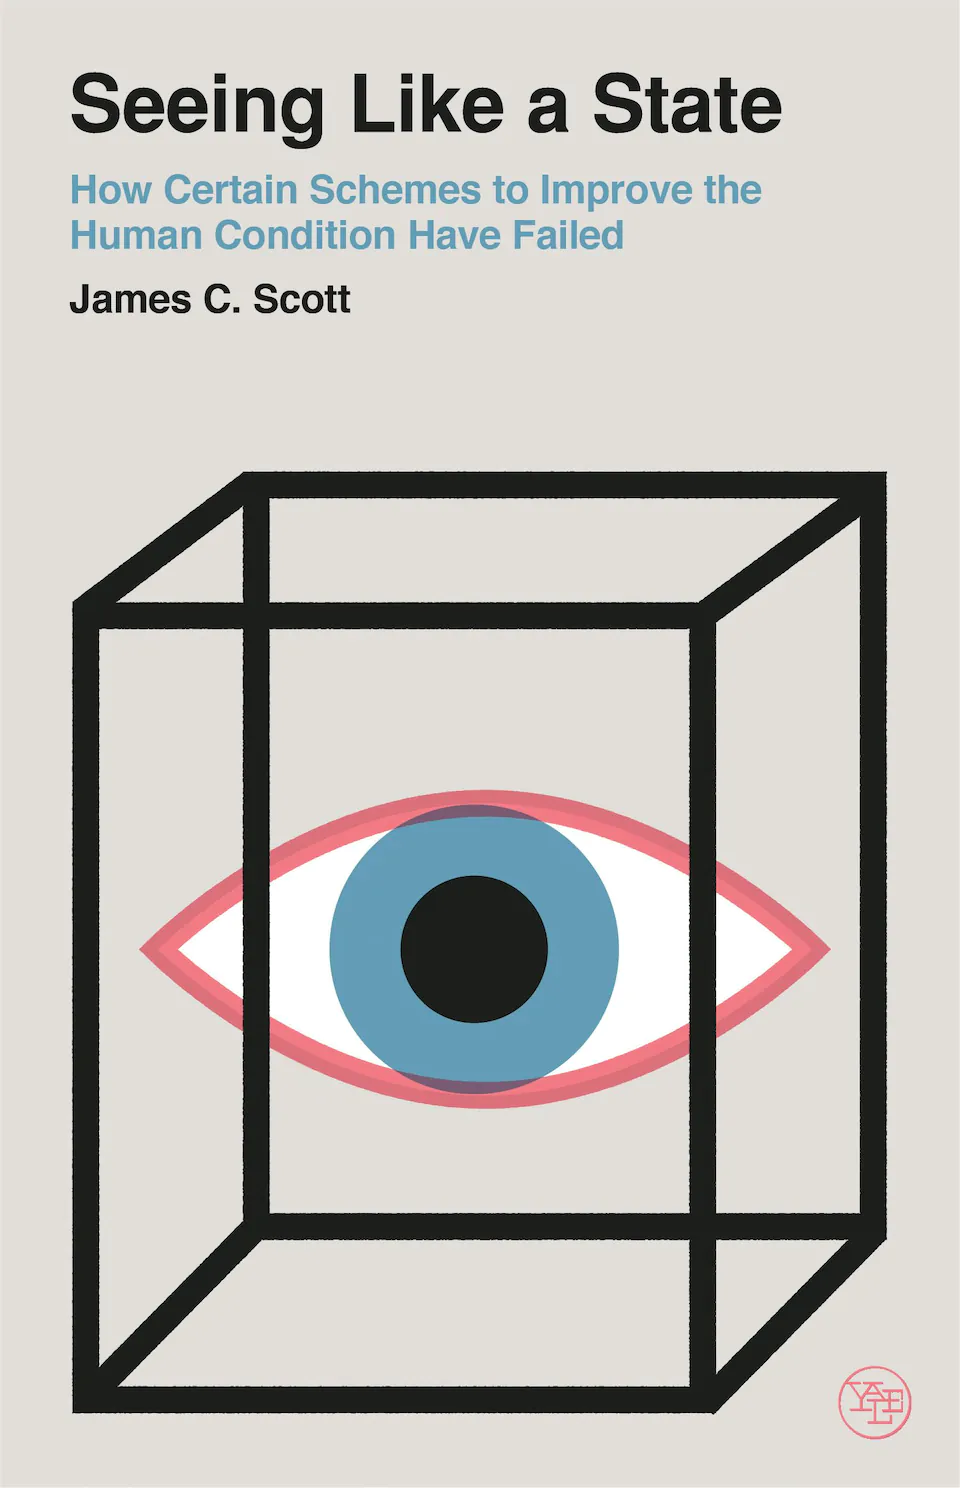 Seeing Like a State: How Certain Schemes to Improve the Human Condition Have Failed by James C. Scott finished on 2024 May 27